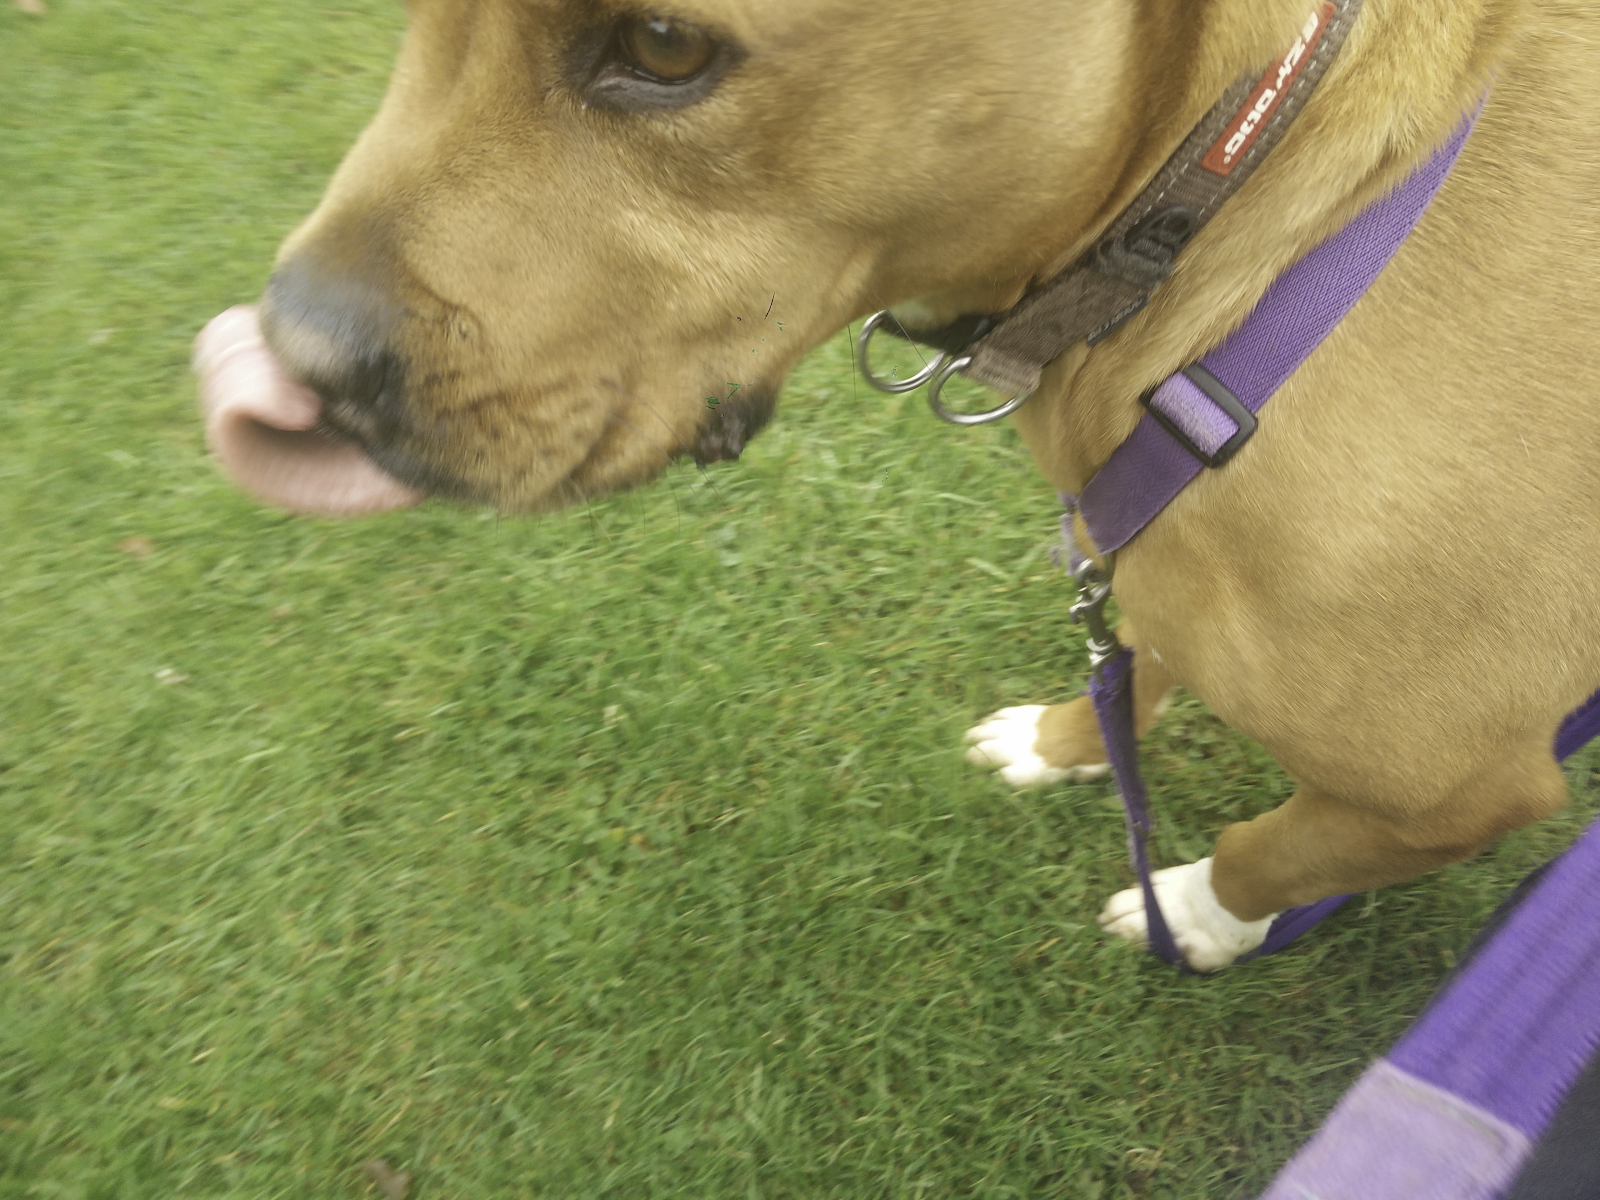 A staffy type dog licking their lips, with a tight muzzle and tense face and showing a slight paw lift. May precede a dog barking if it becomes more stressed.